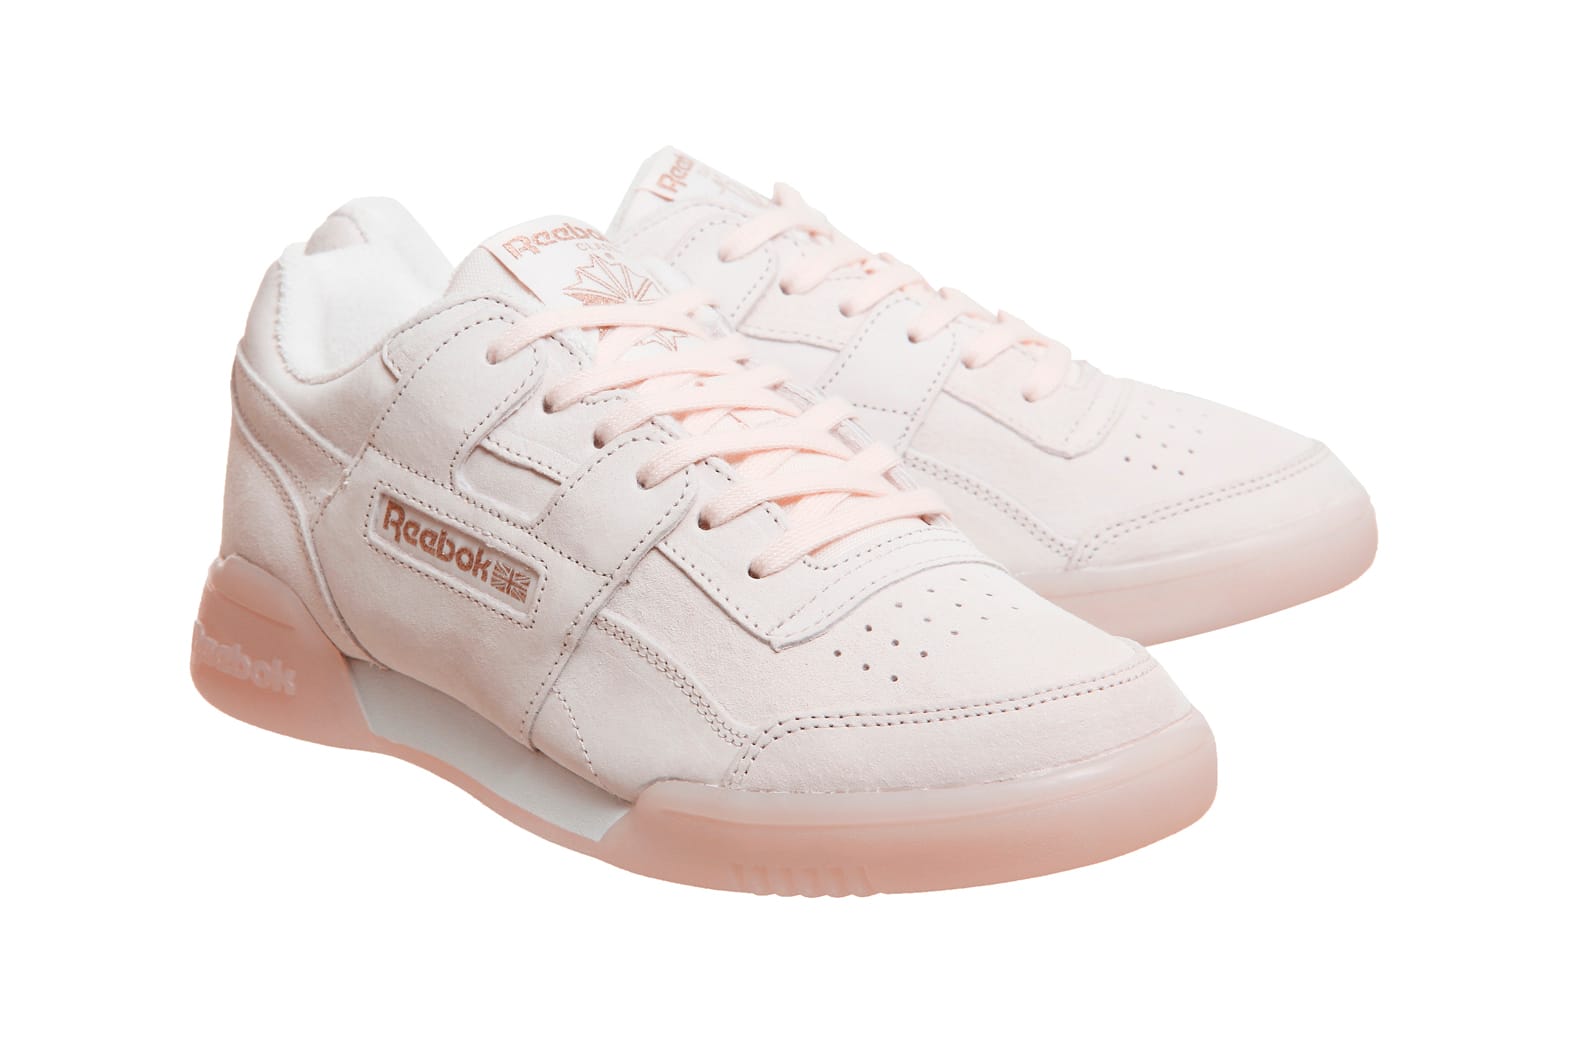 Reebok Workout Plus in Pastel Pink and 